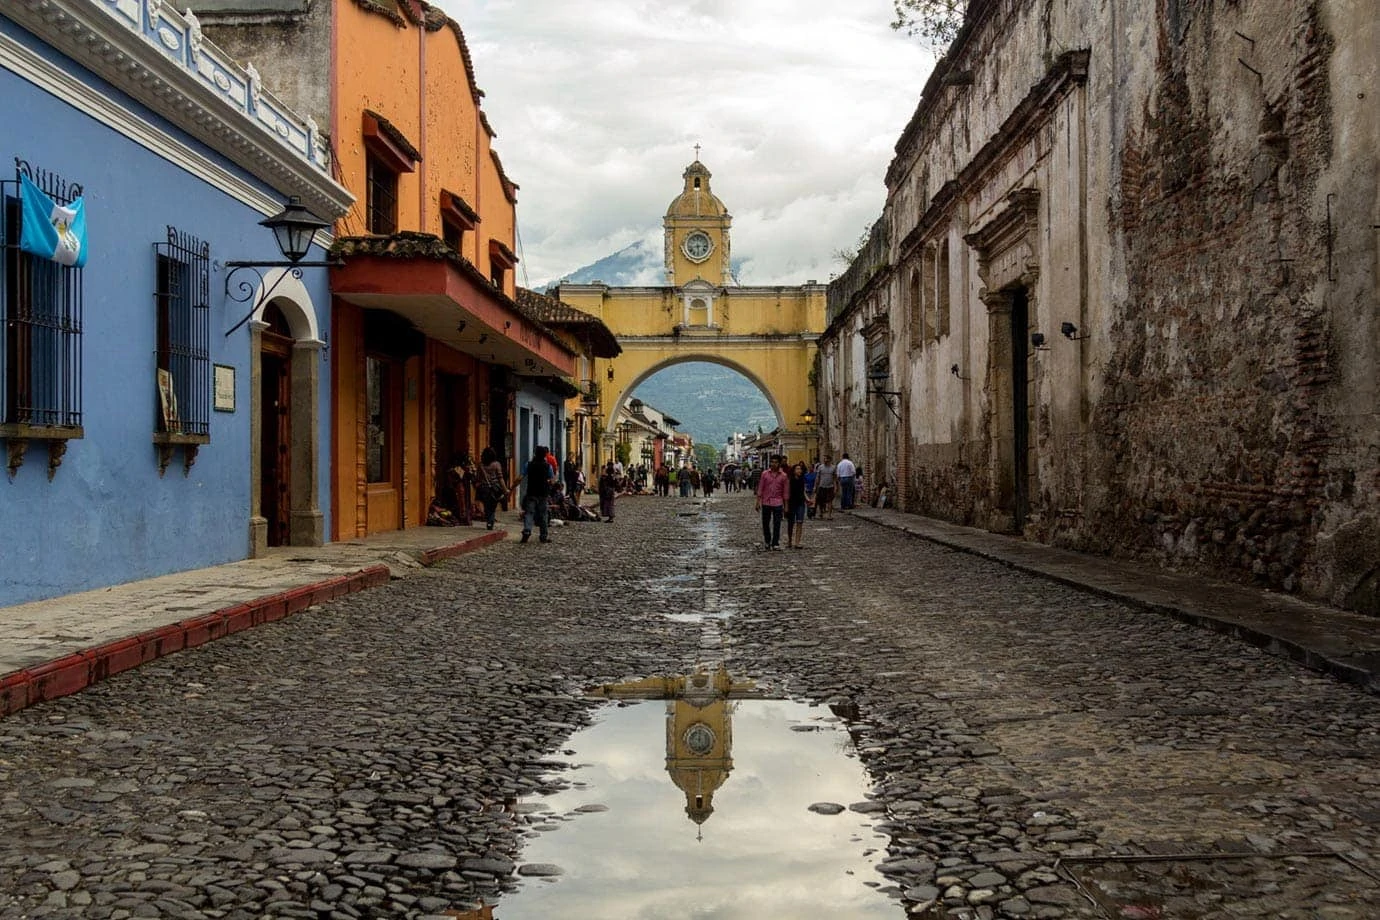 Is Antigua Just Another Tourist Town?